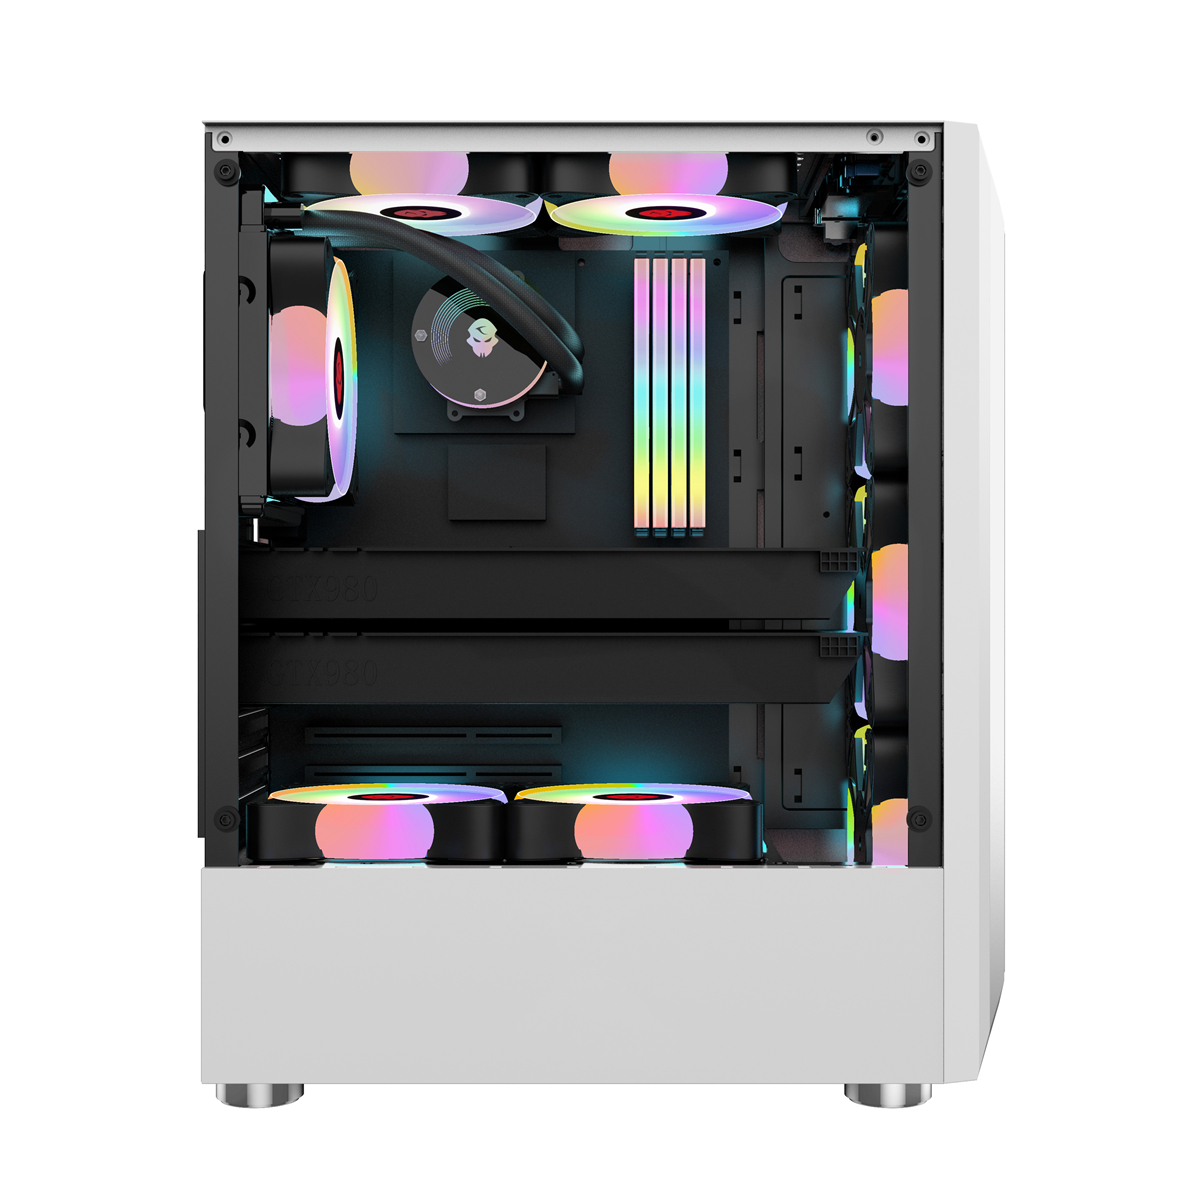 Find GAMEKM Computer Case Mid Tower ATX/M ATX/ITX Acrylic Side Panel RGB Gaming Computer PC Case USB 3 0/USB 2 0/HDD/SSD for Desktop PC Computer for Sale on Gipsybee.com with cryptocurrencies